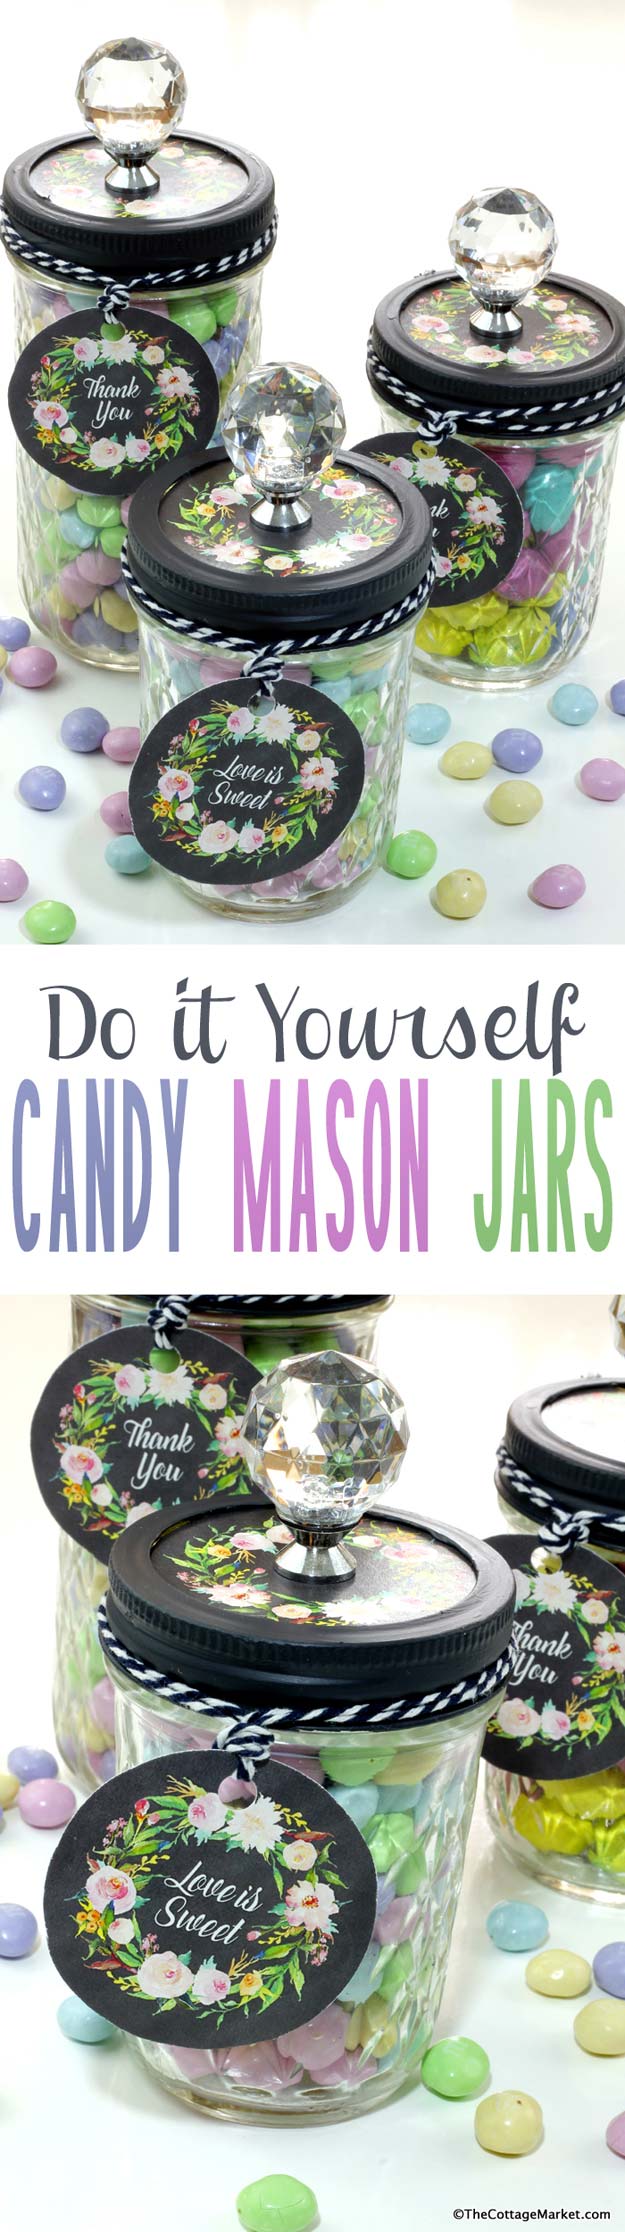 Cute DIY Mason Jar Gift Ideas for Teens - DIY Candy Mason Jars - Best Christmas Presents, Birthday Gifts and Cool Room Decor Ideas for Girls and Boy Teenagers - Fun Crafts and DIY Projects for Snow Globes, Dollar Store Crafts and Valentines for Kids